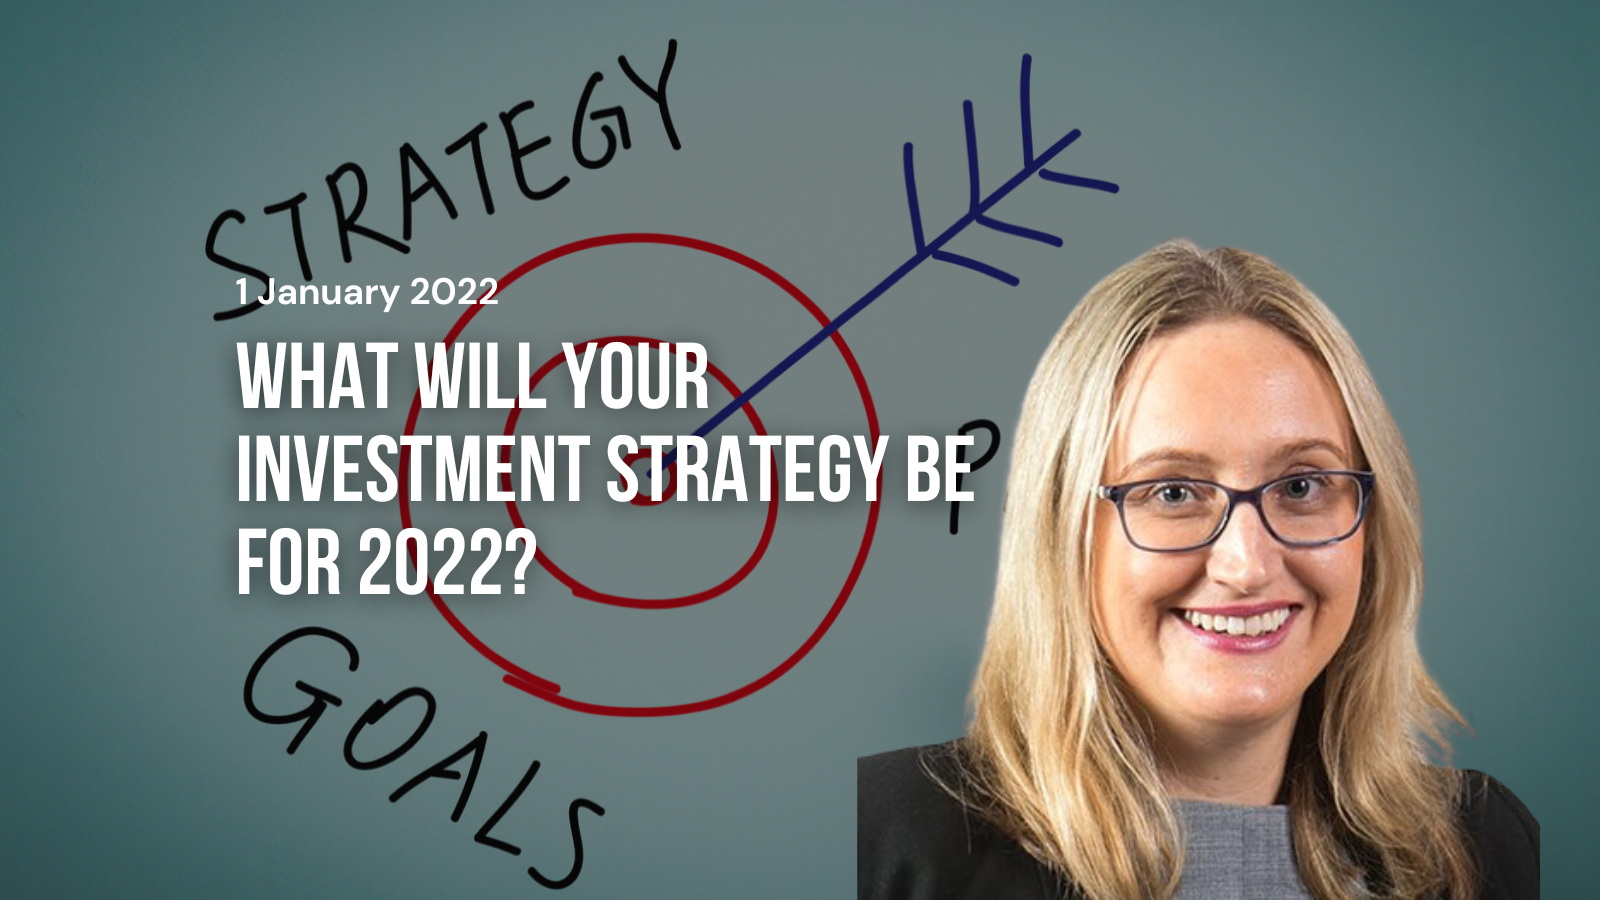 What will your investment strategy be for 2022?